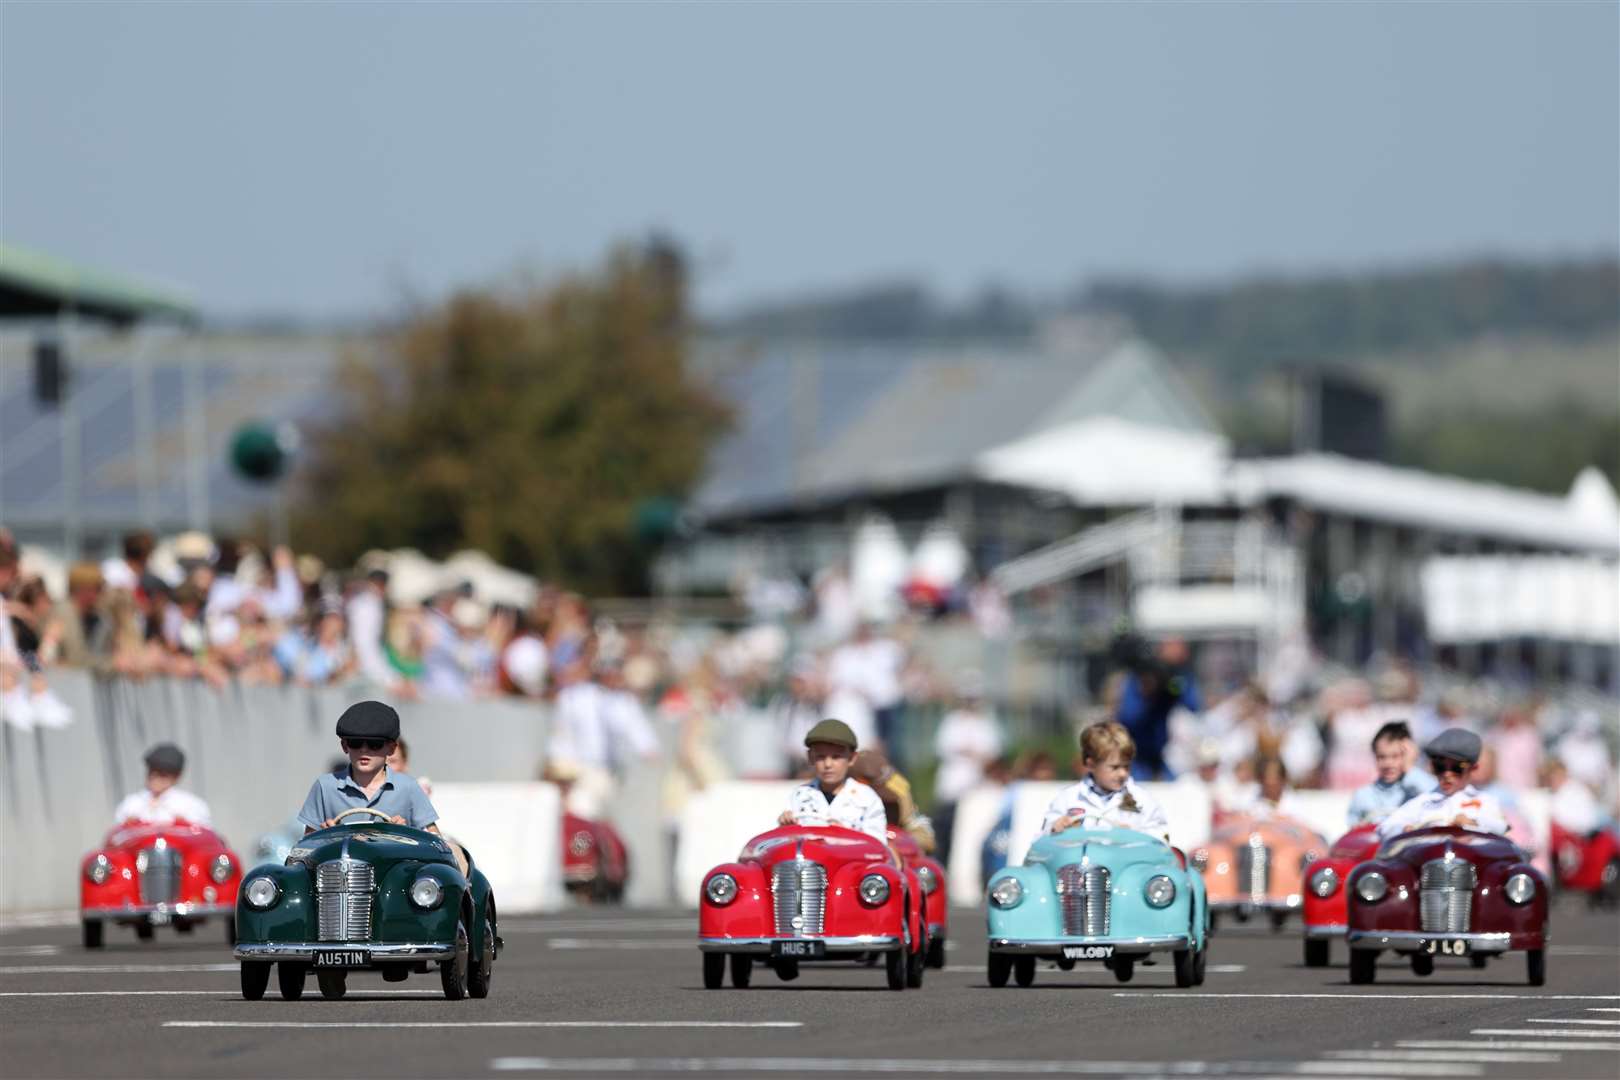 Young racers in flat caps compete in the Settrington Cup – dubbed the ‘world’s cutest race’ – at the Goodwood Motor Circuit in West Sussex in September (PA)